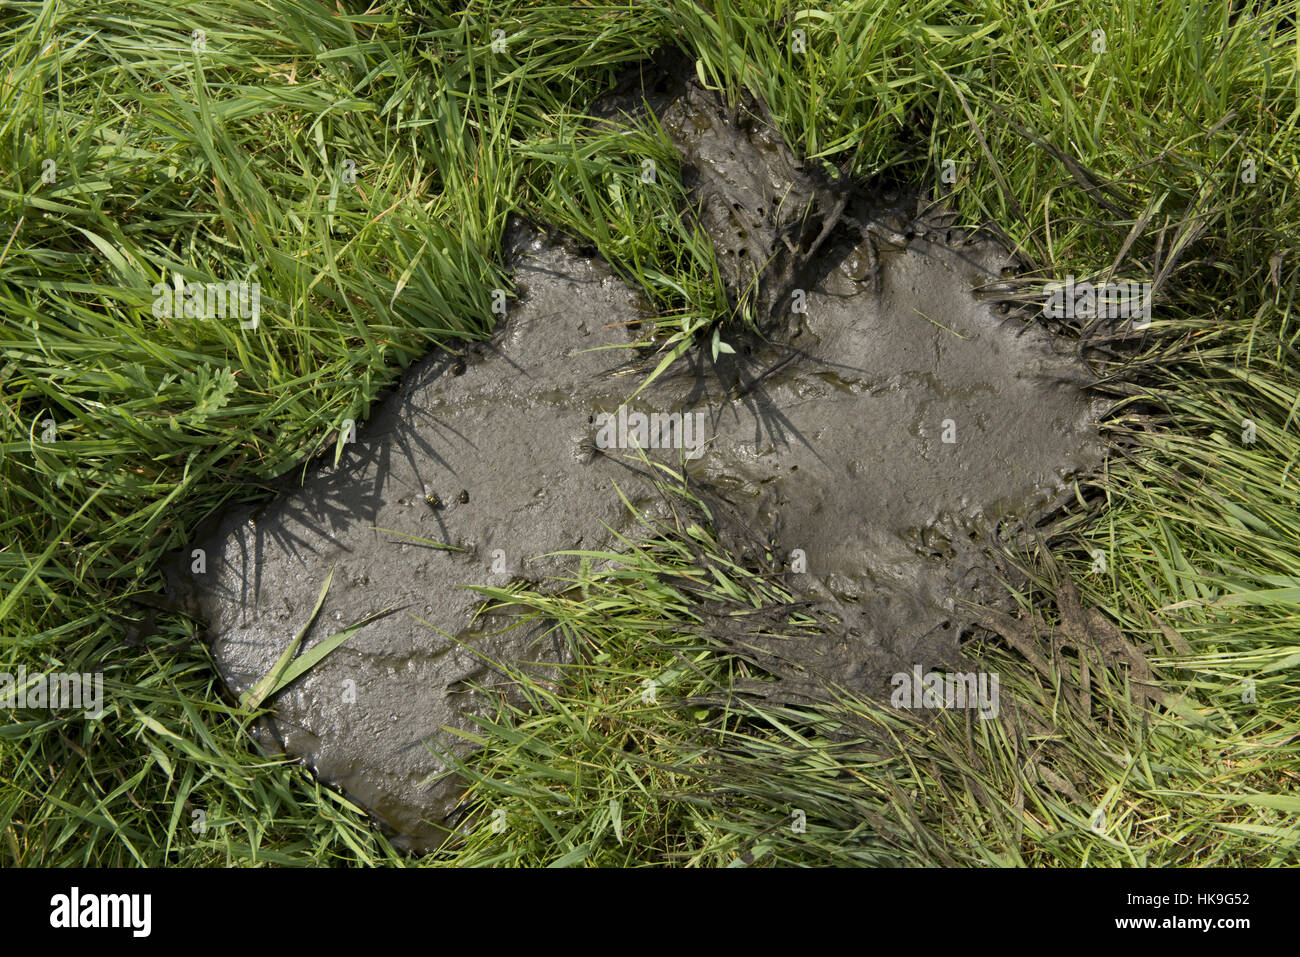 A fresh runny cow pat from a cow grazing on young spring grass, Berkshire, May Stock Photo